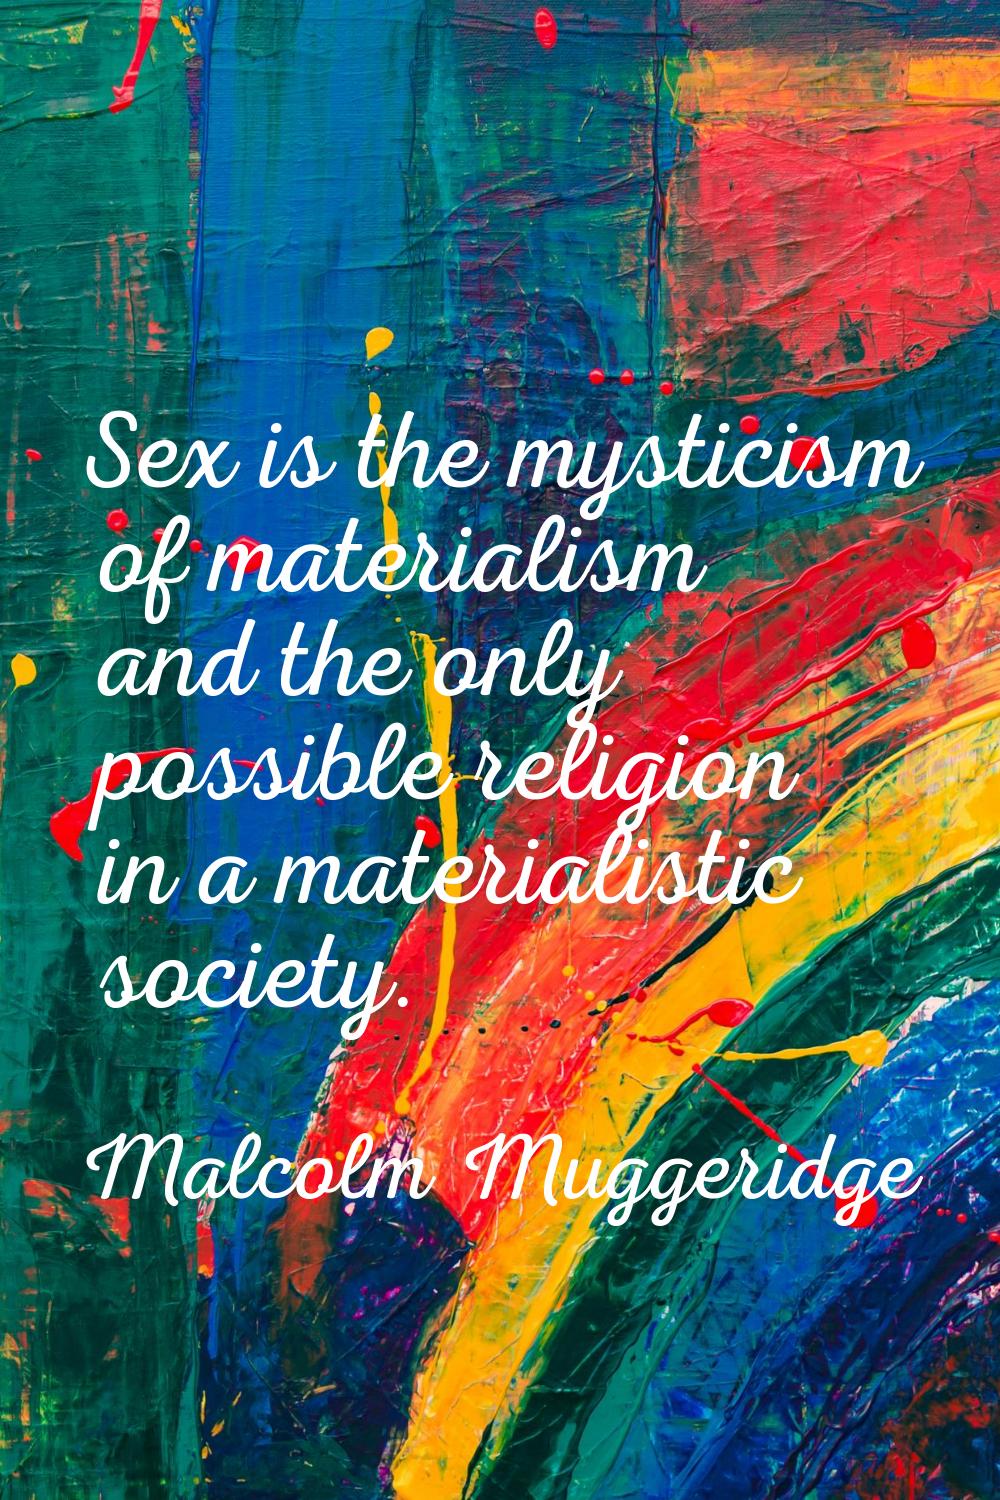 Sex is the mysticism of materialism and the only possible religion in a materialistic society.